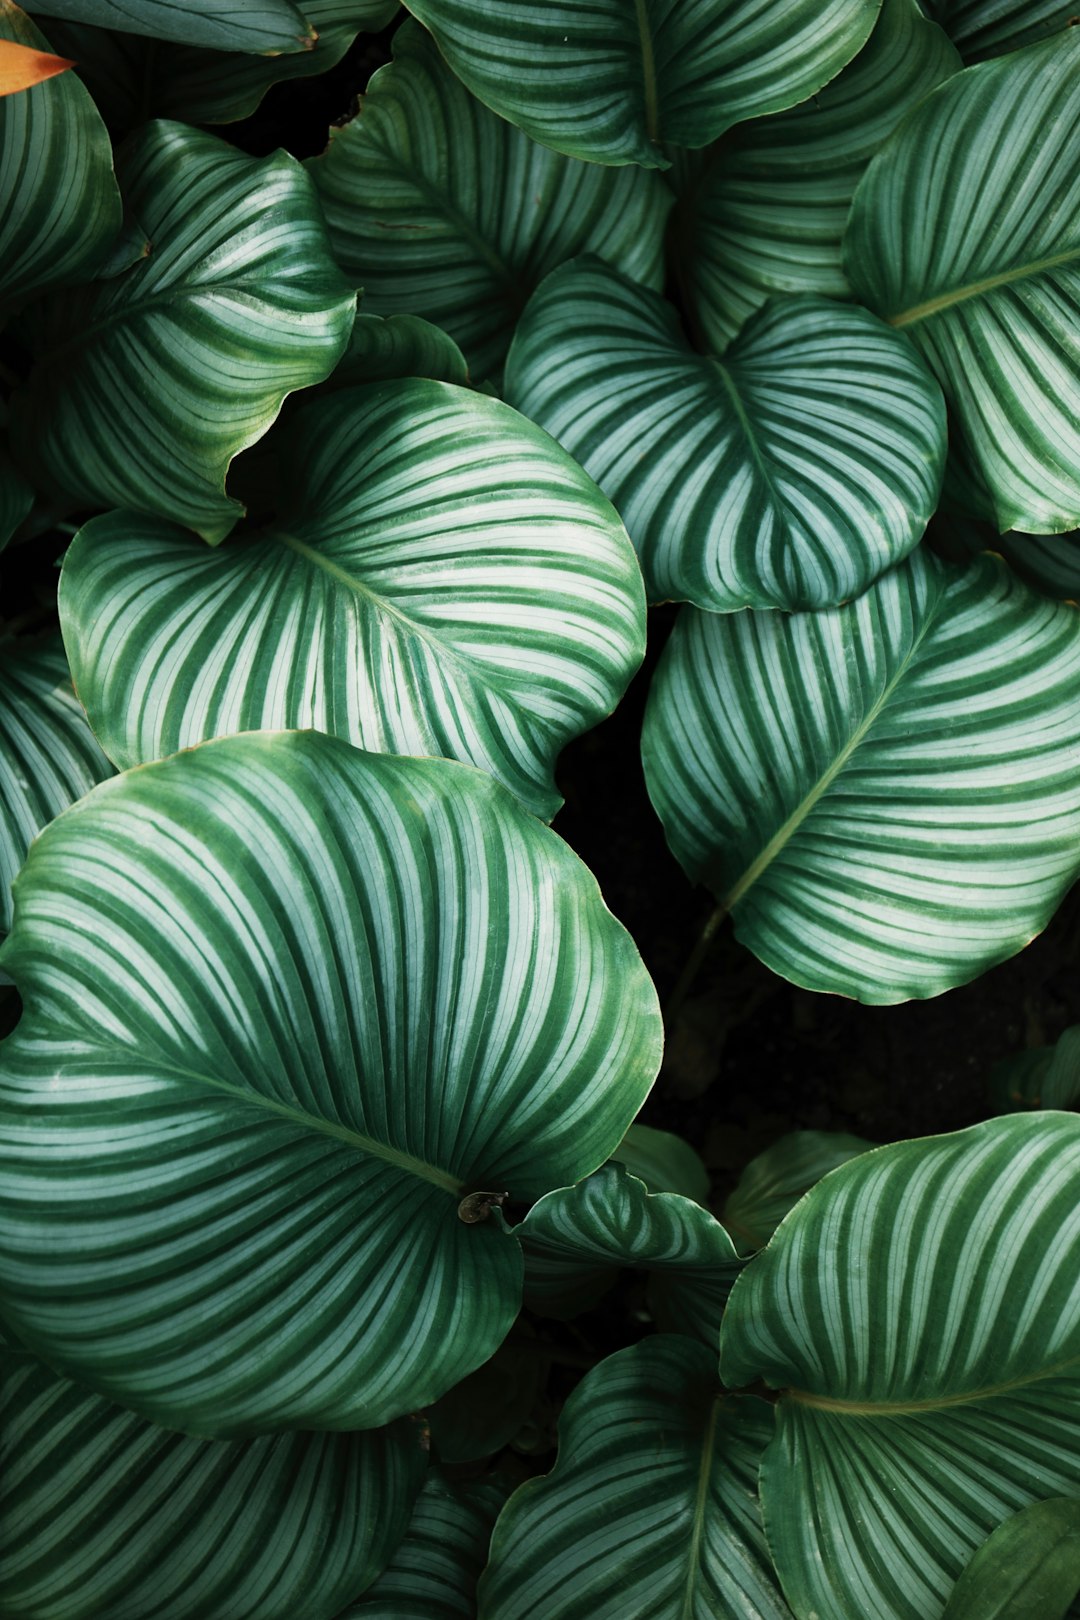  green and white leafed plants plants